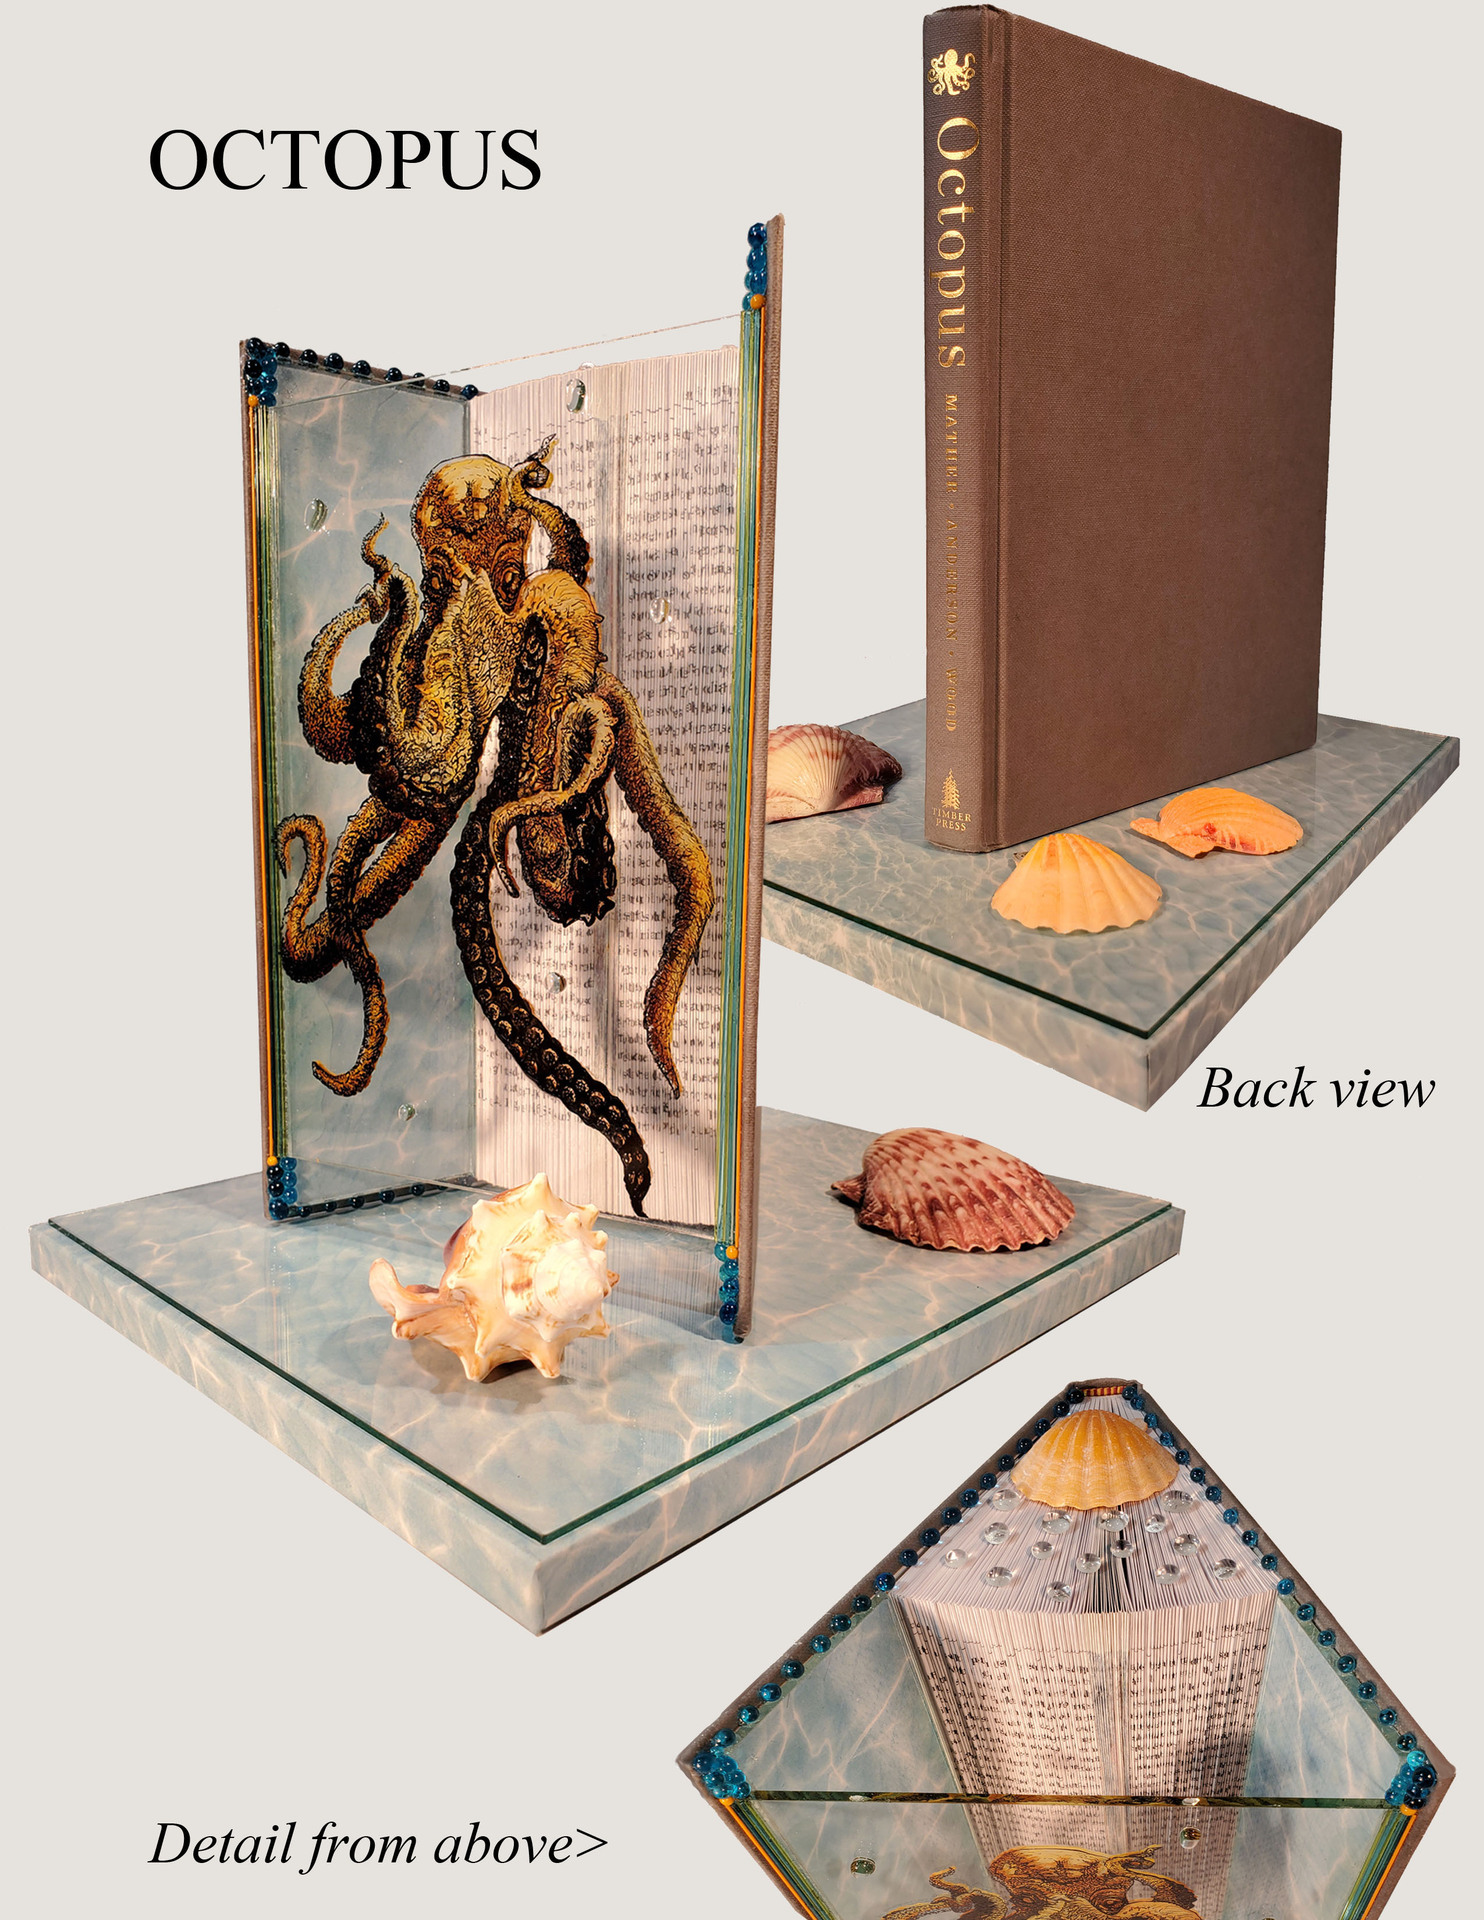 Nanci Schrieber-Smith mixed media sculpture with painted image of an Octopus on plexiglass with a book background.